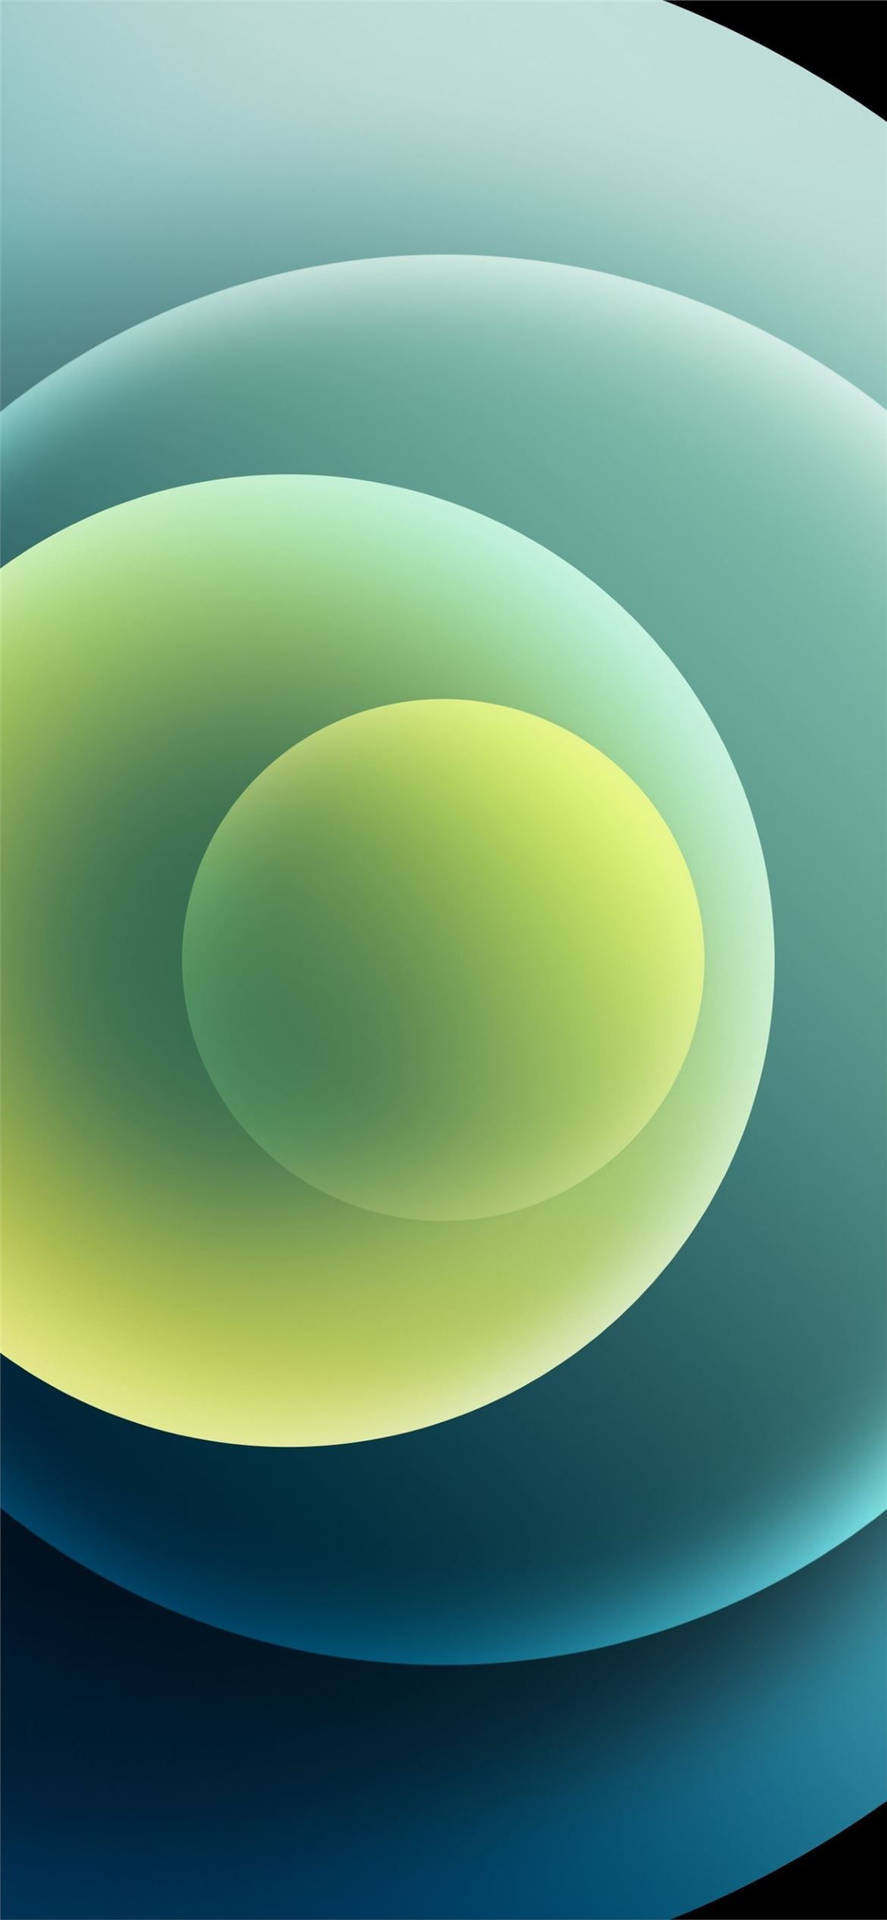 Iphone 12 Stock Blue Green Circles Background